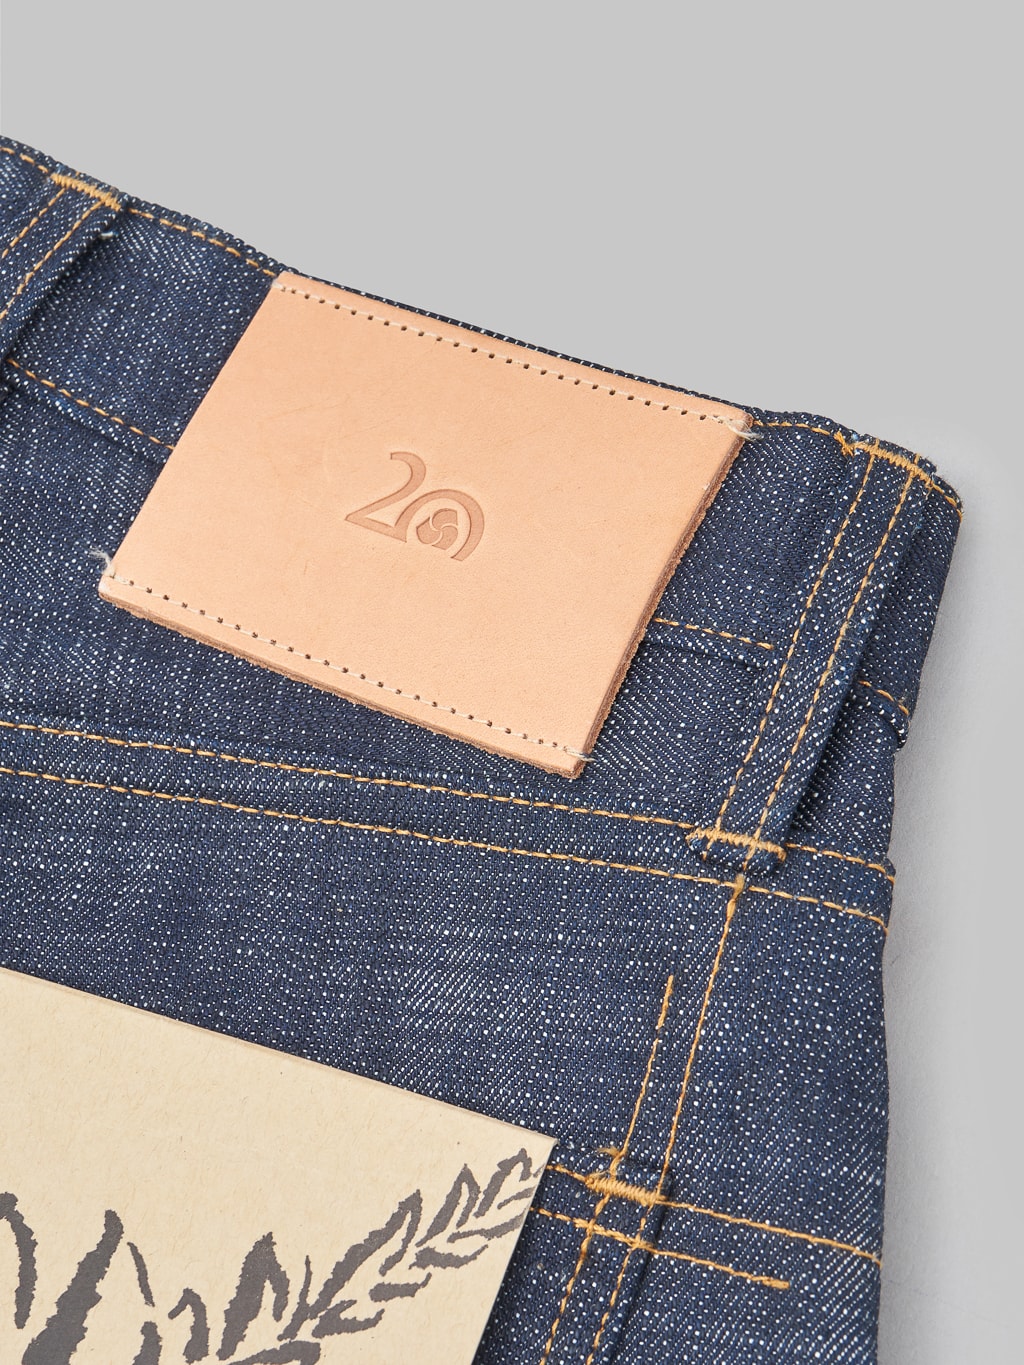 3sixteen CT 102xn 20th Anniversary Natural Indigo Jeans leather patch